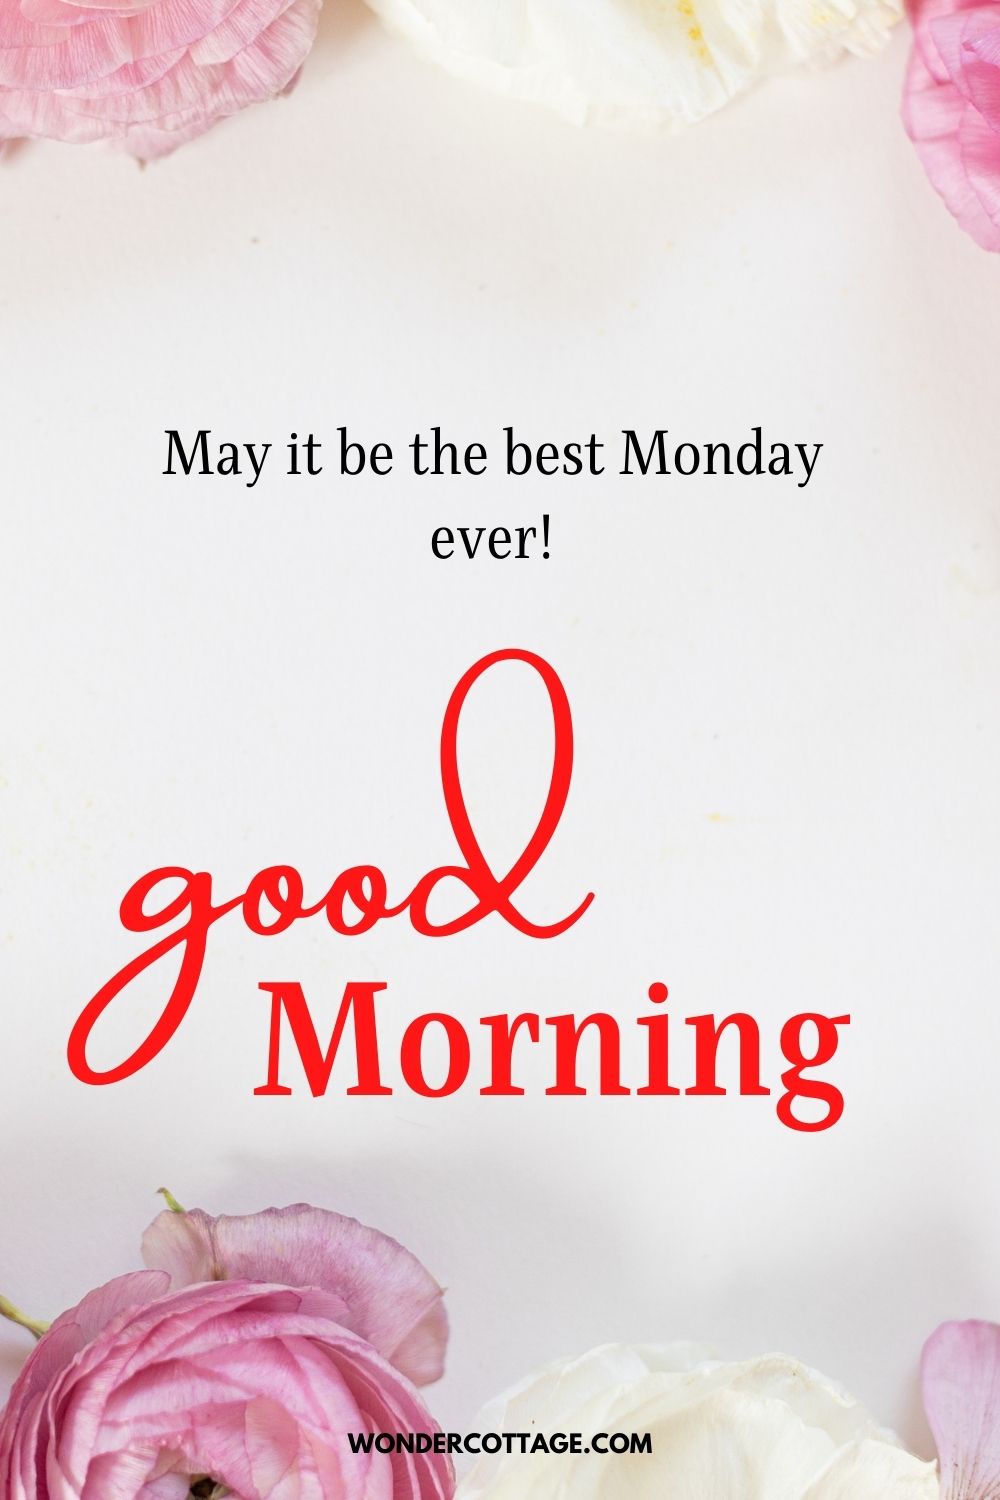 May it be the best Monday ever! Good morning Monday!